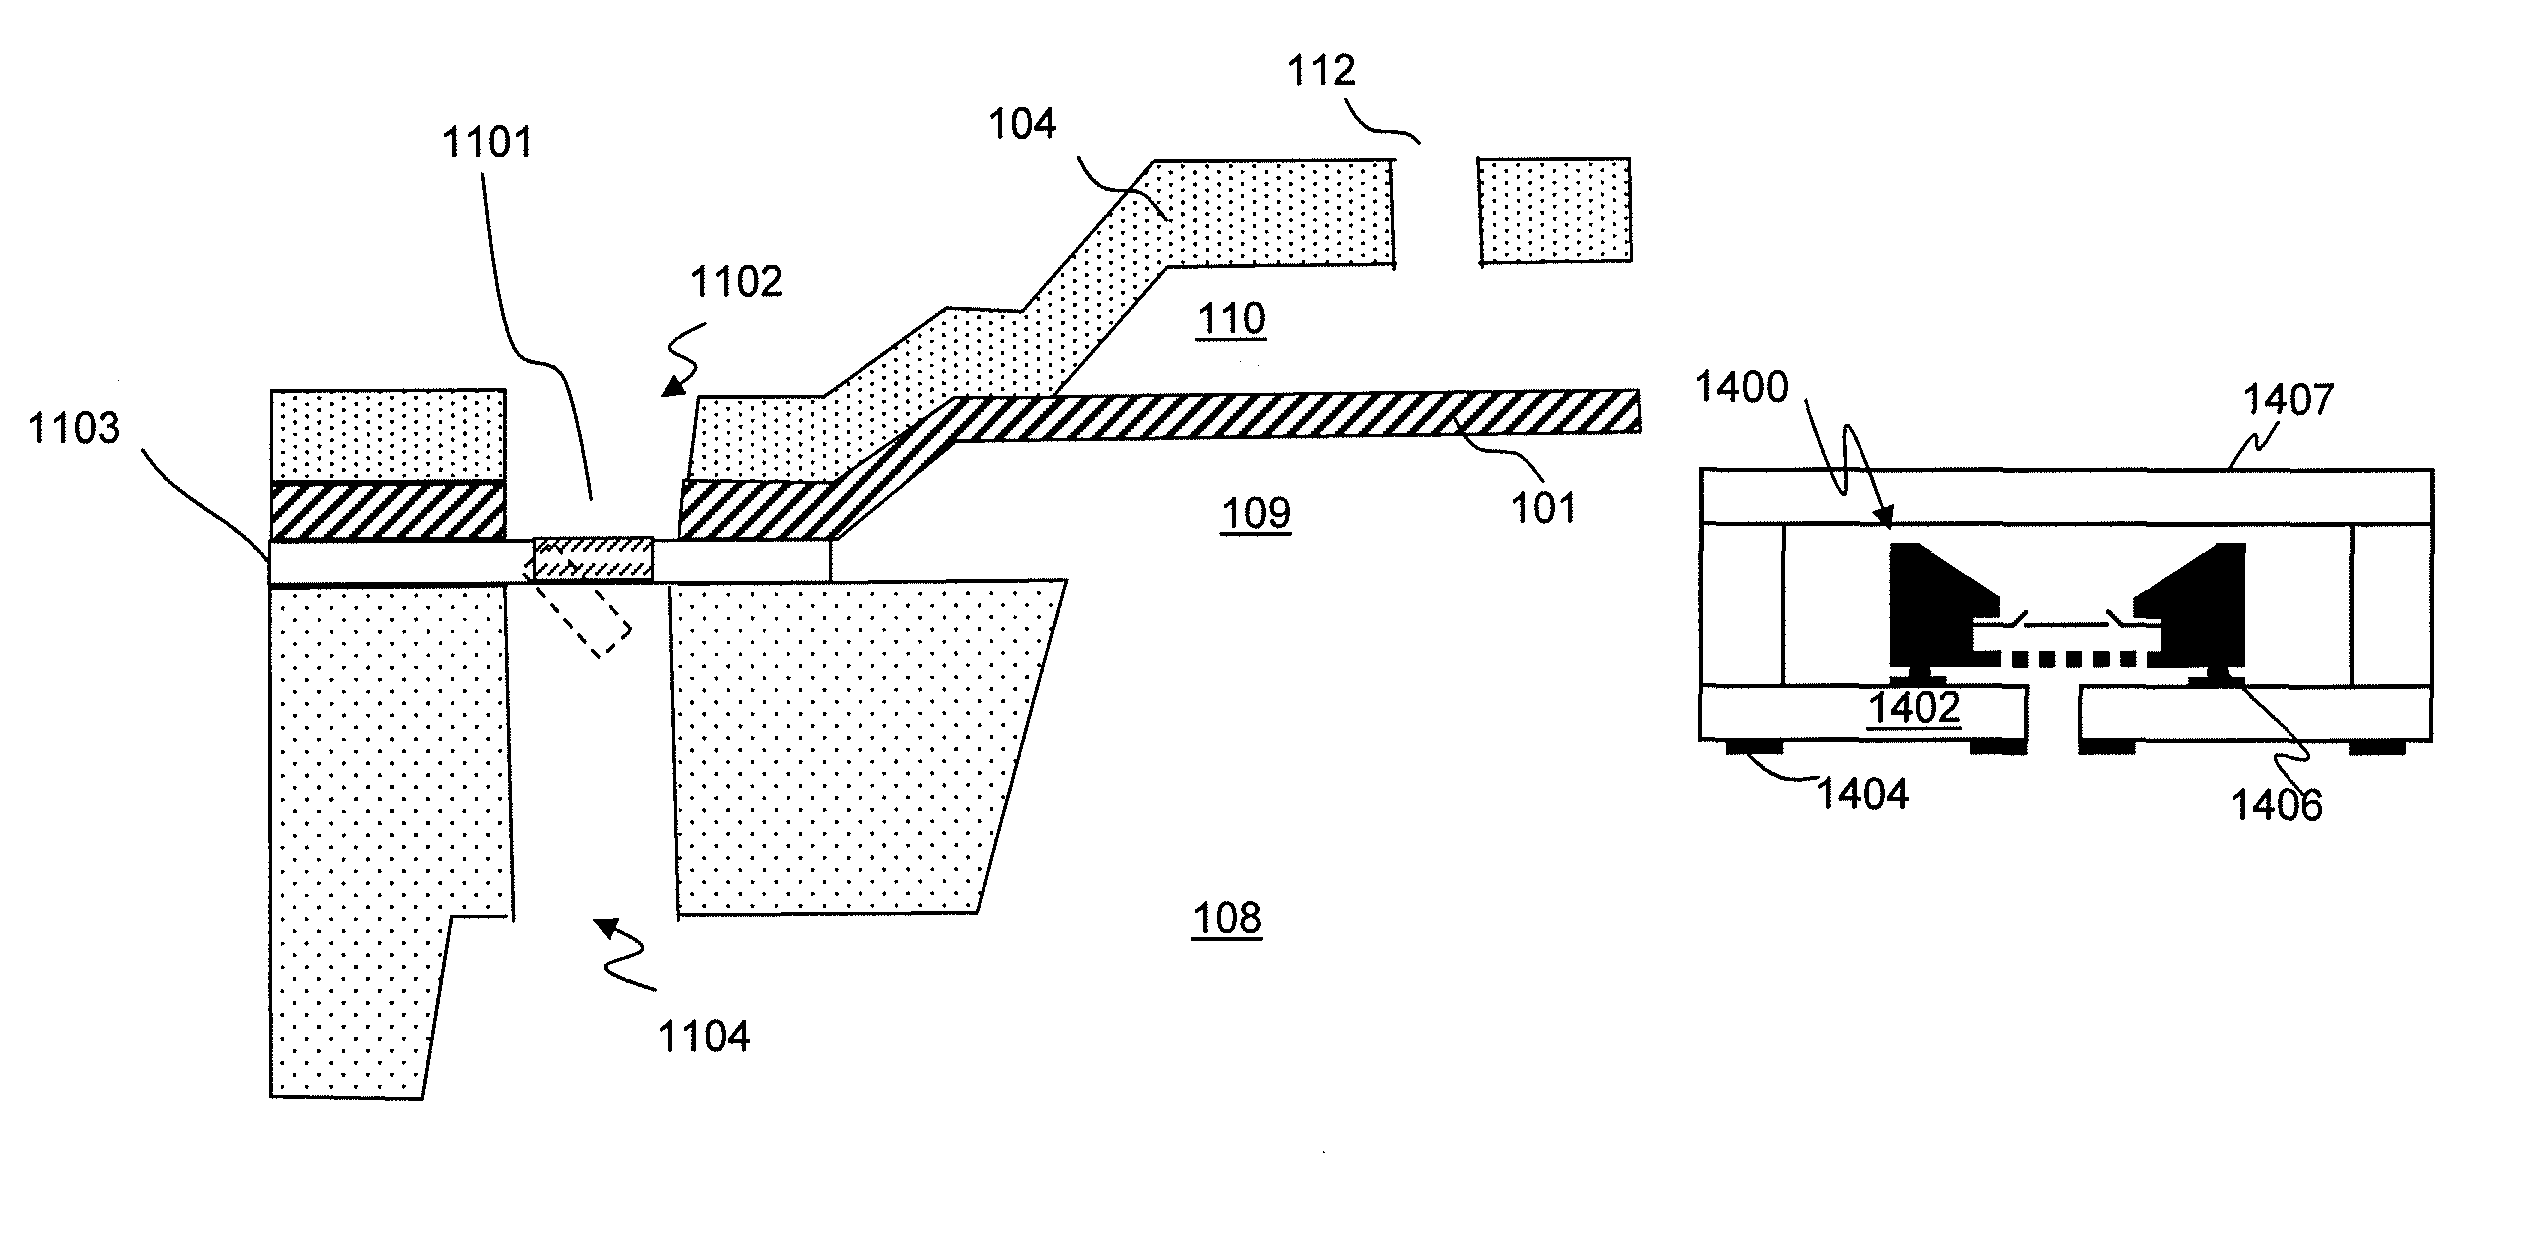 MEMS device and process